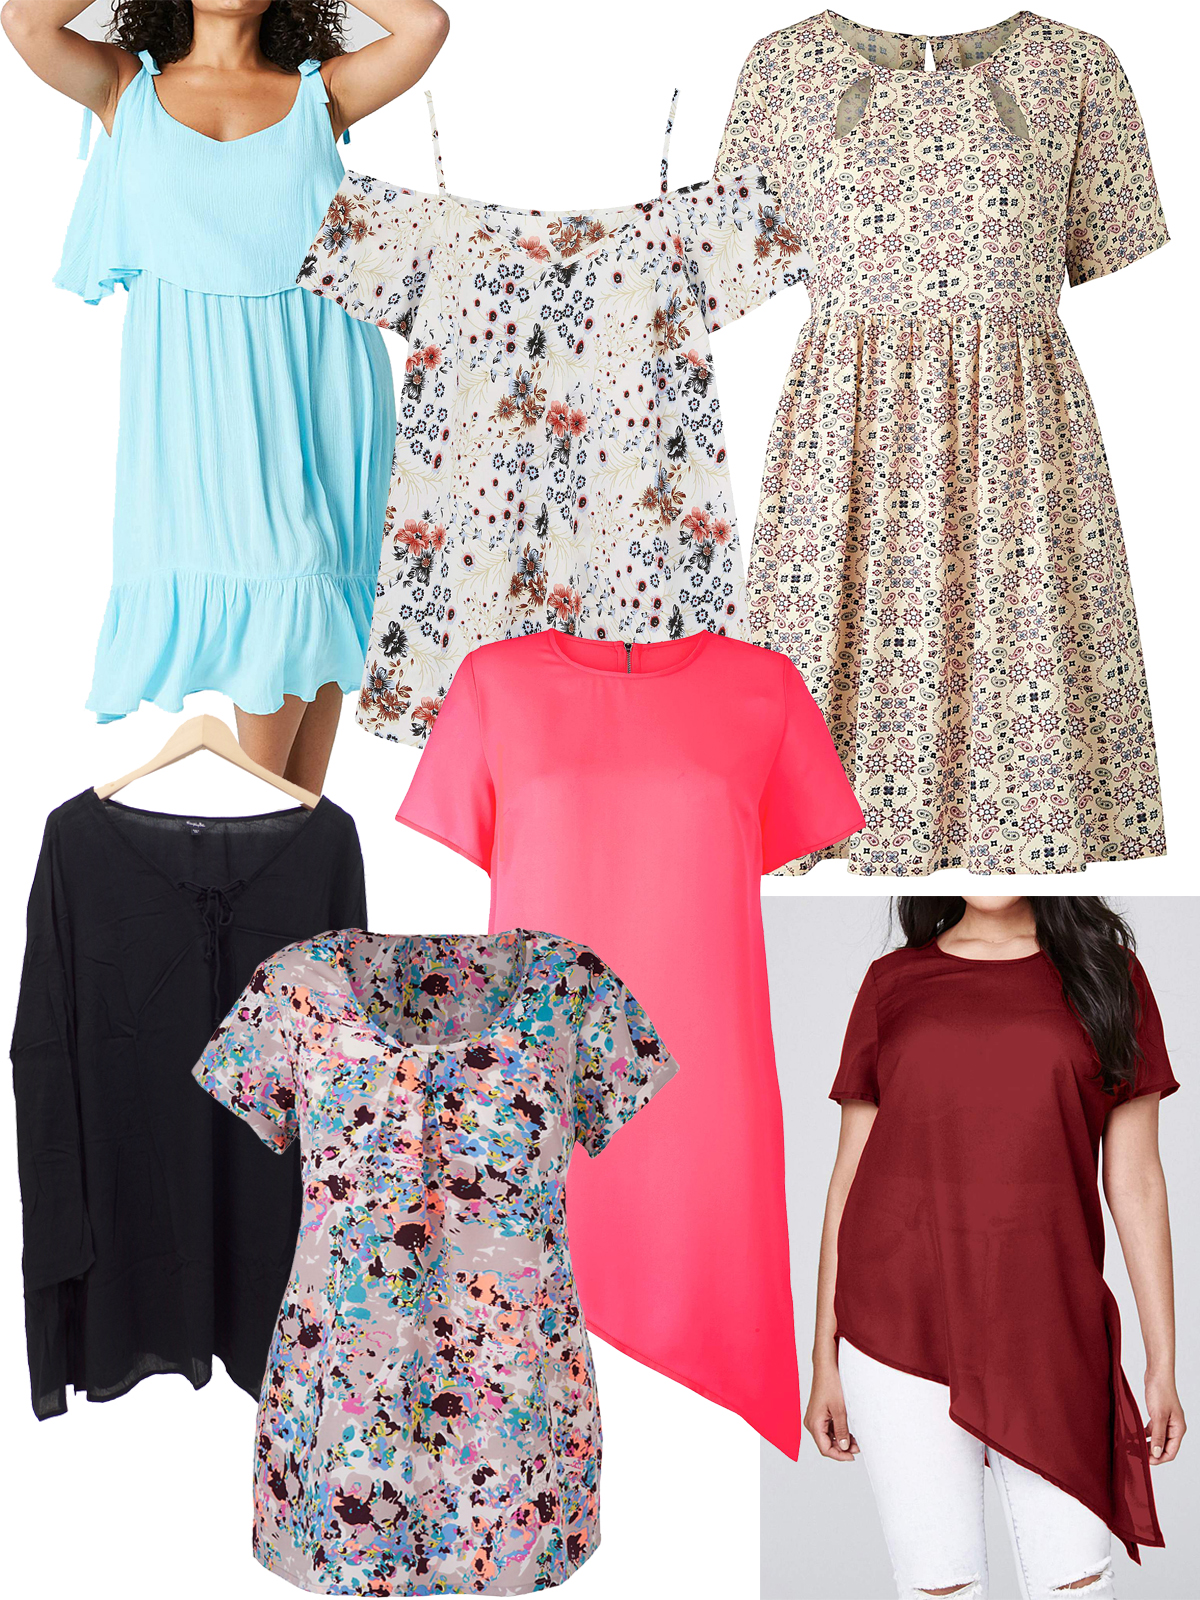 Plus Size wholesale clothing by simply be - - SimplyBe ASSORTED Tops ...